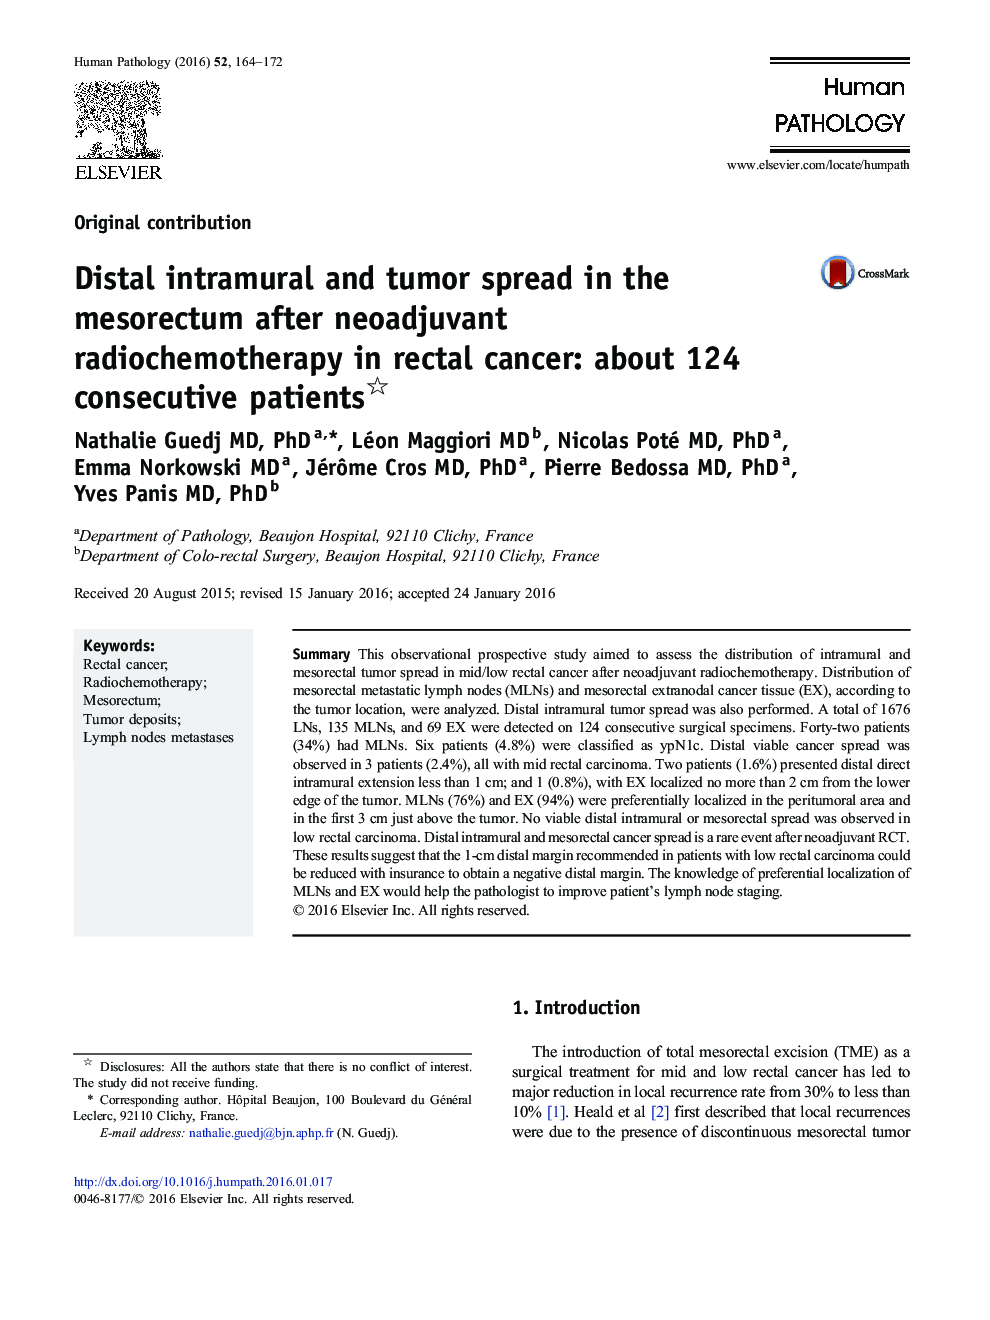 Distal intramural and tumor spread in the mesorectum after neoadjuvant radiochemotherapy in rectal cancer: about 124 consecutive patients